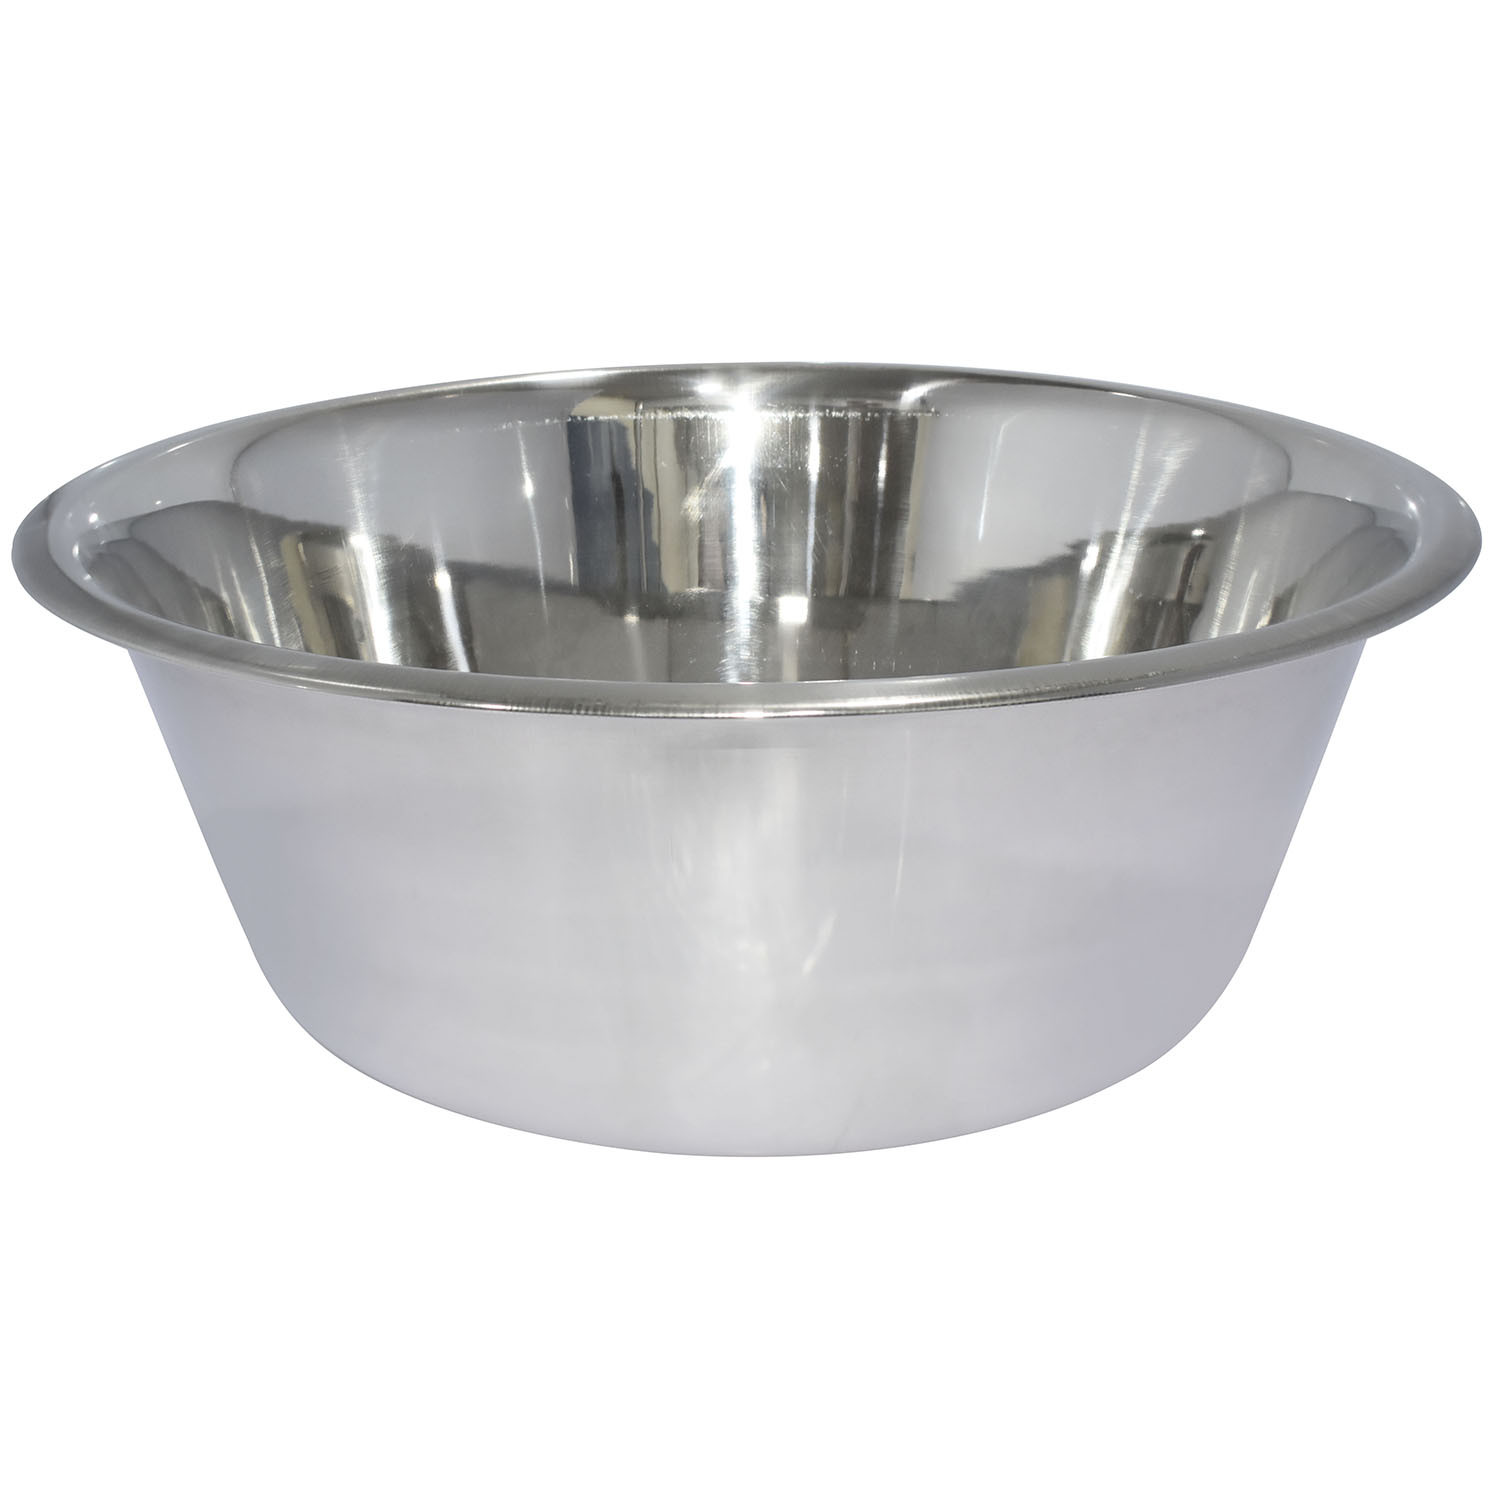 Clever Paws Medium Stainless Steel Pet Bowl Image